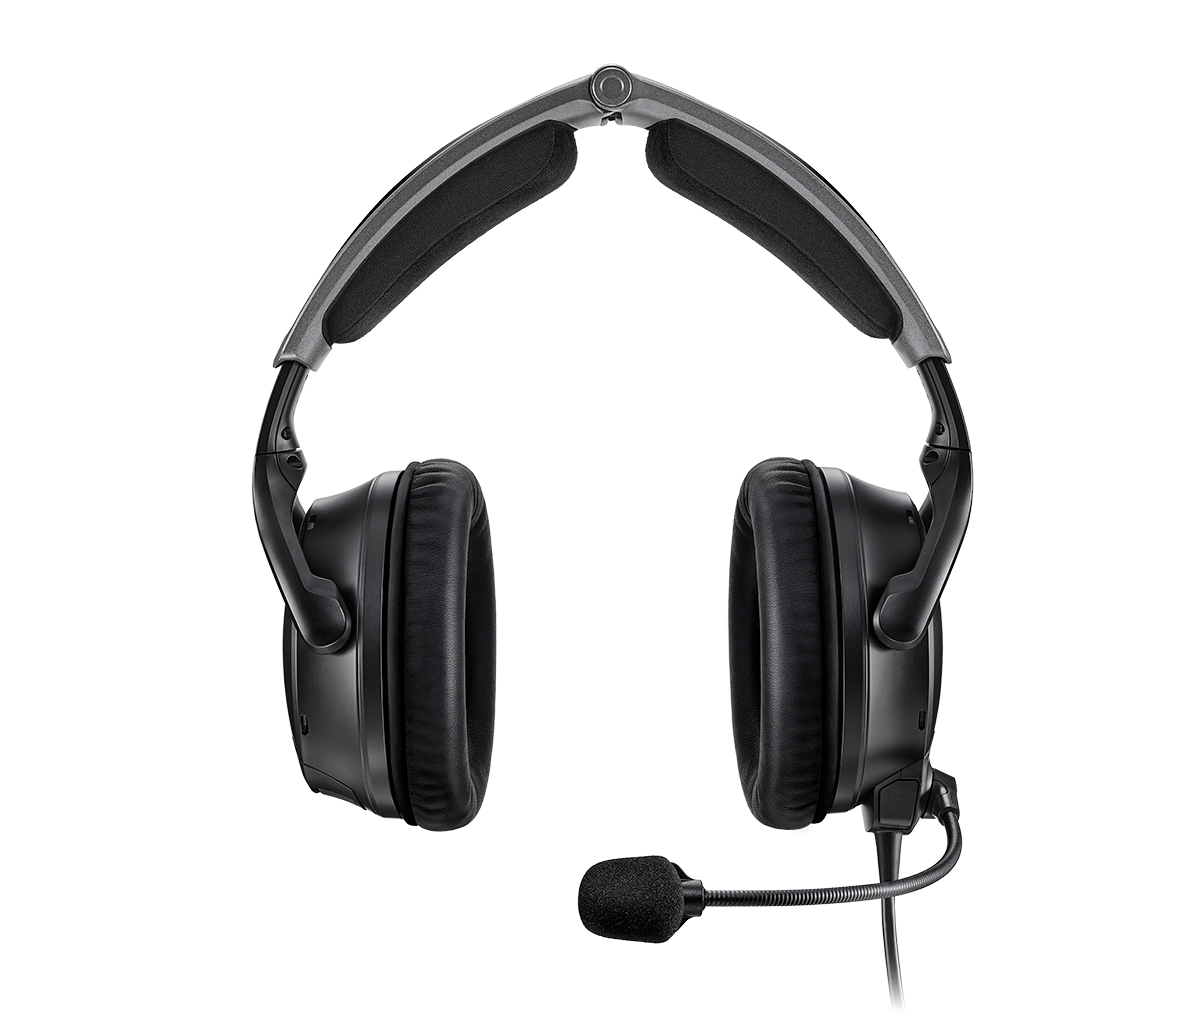 Løs mistet hjerte sammenbrud Bose A30 Aviation Headset: Unmatched Comfort, Noise Reduction, and Clarity